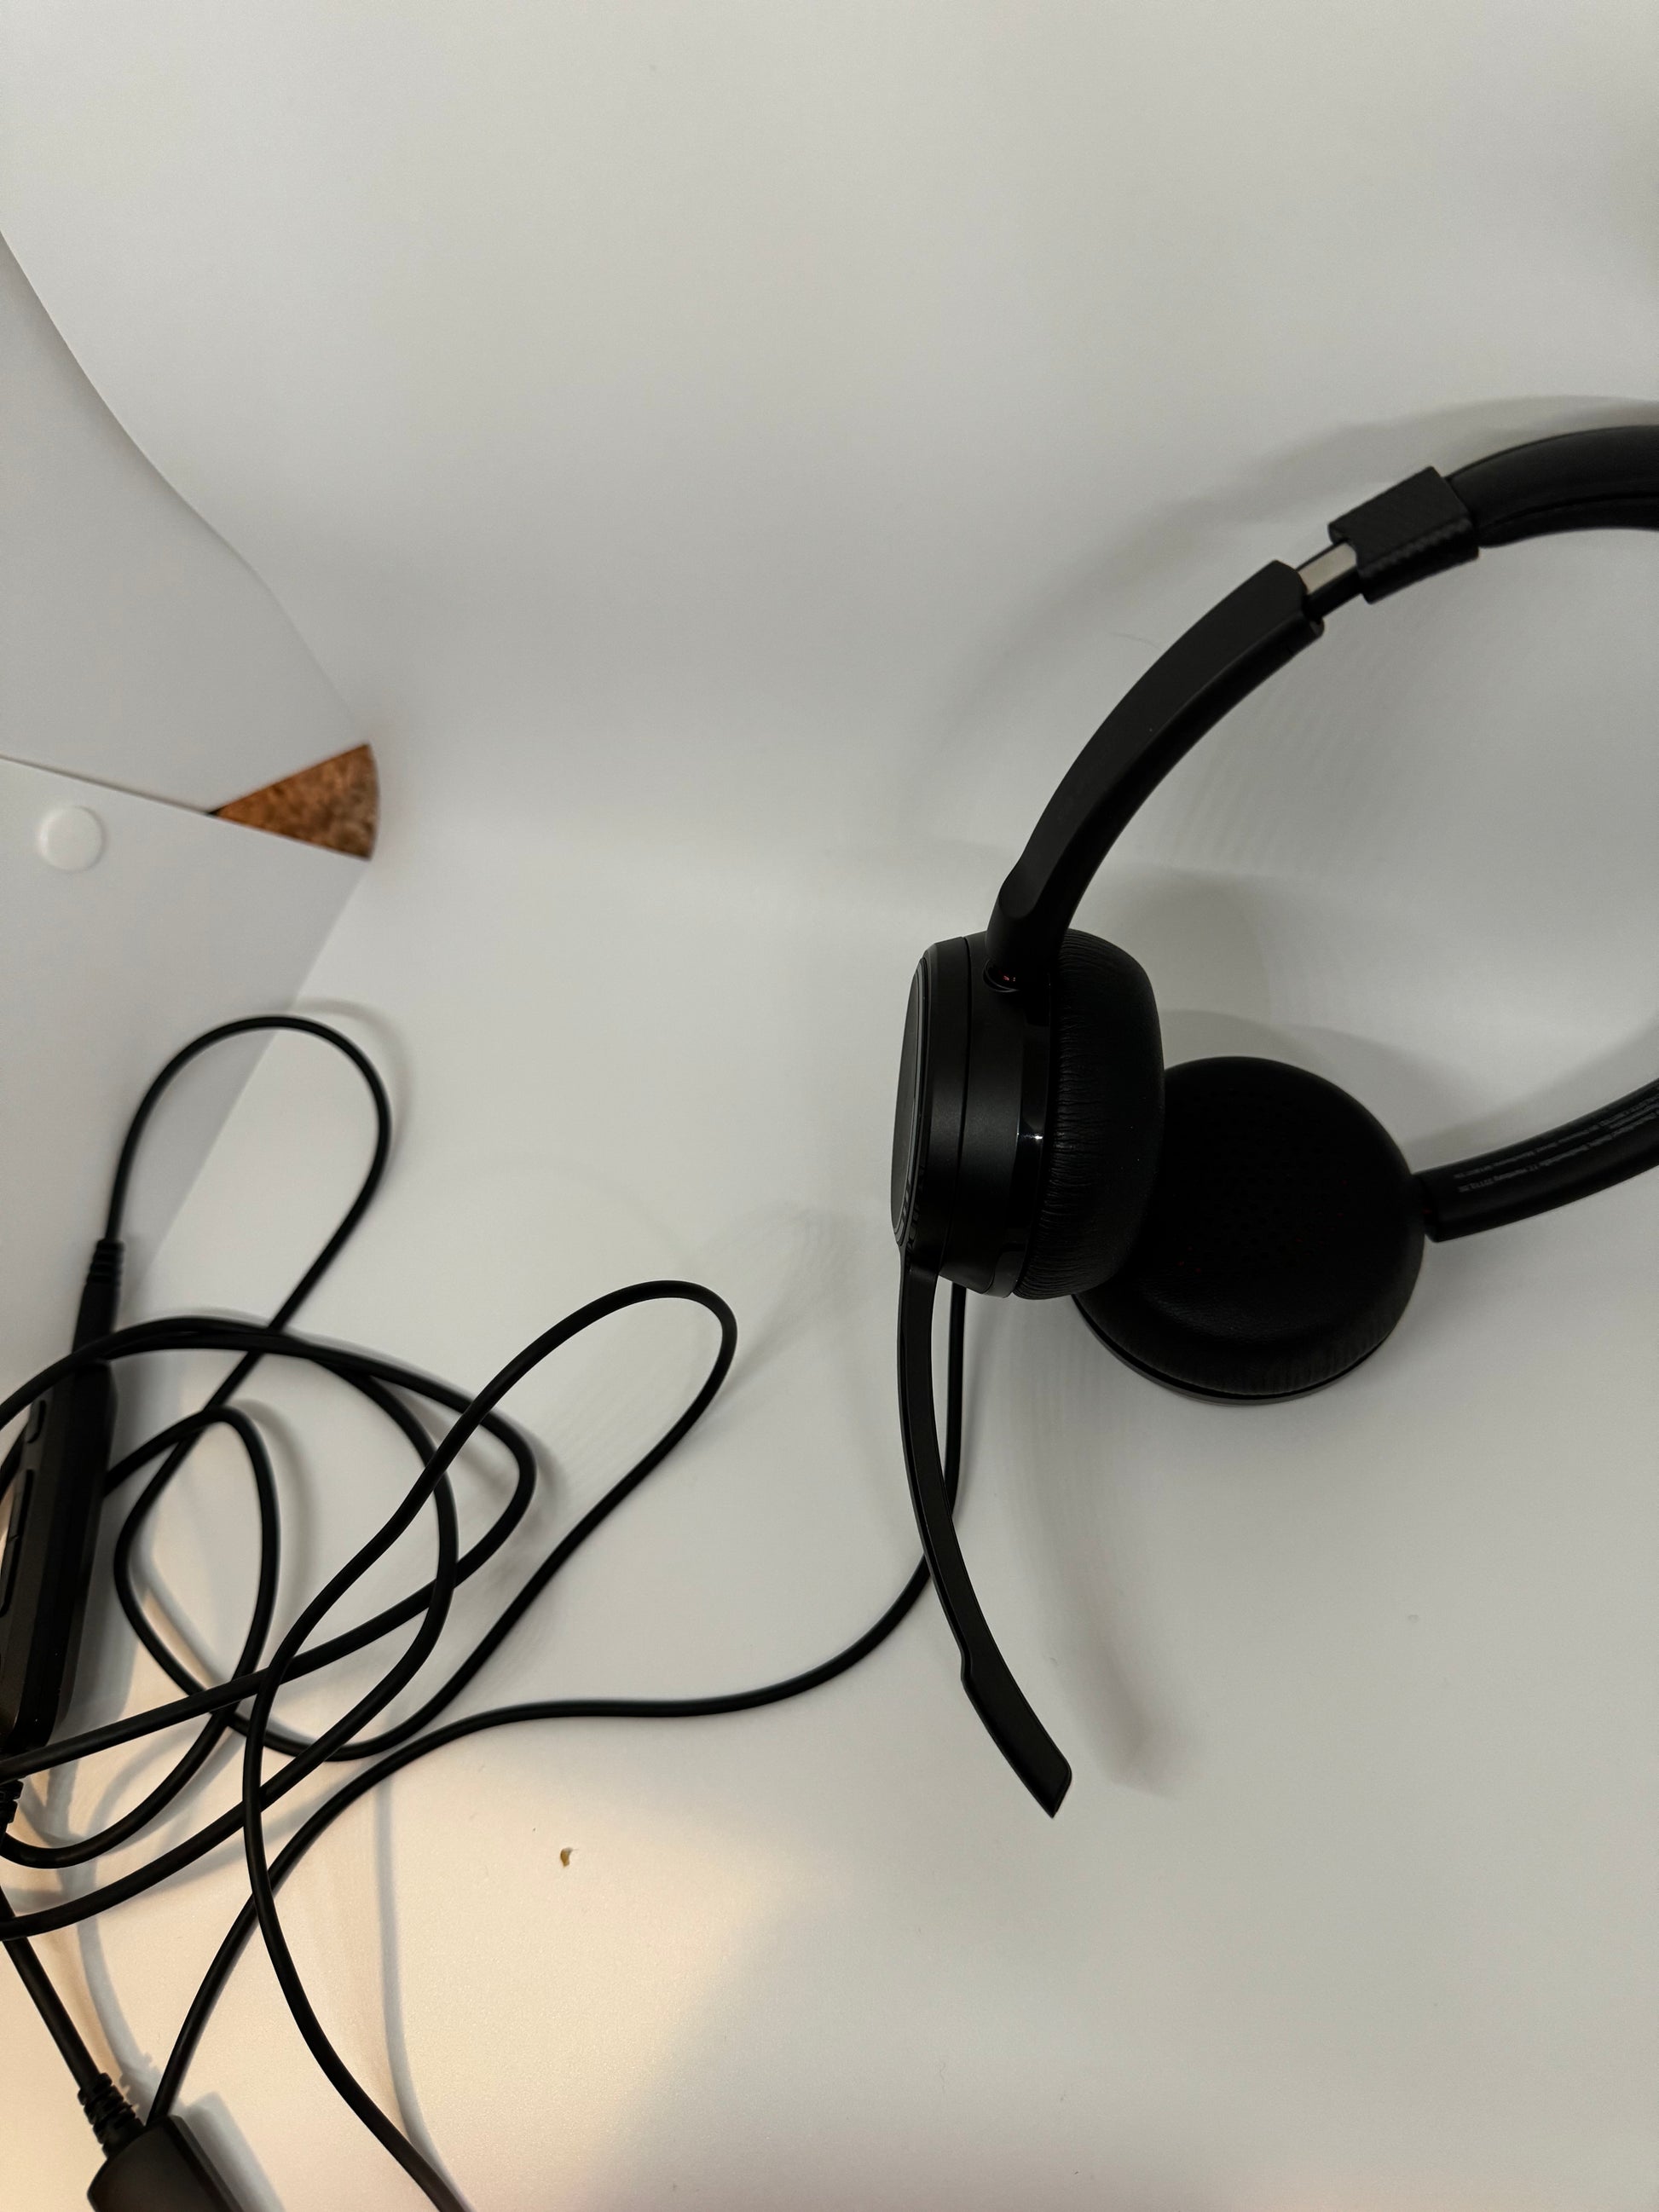 The picture shows a pair of black headphones on a white surface. The headphones have a black cord attached to them. The cord is tangled and has a control module attached to it. The background is mostly white with a small portion of a corkboard visible in the top left corner. There is also a tiny speck or crumb on the white surface near the bottom of the picture.